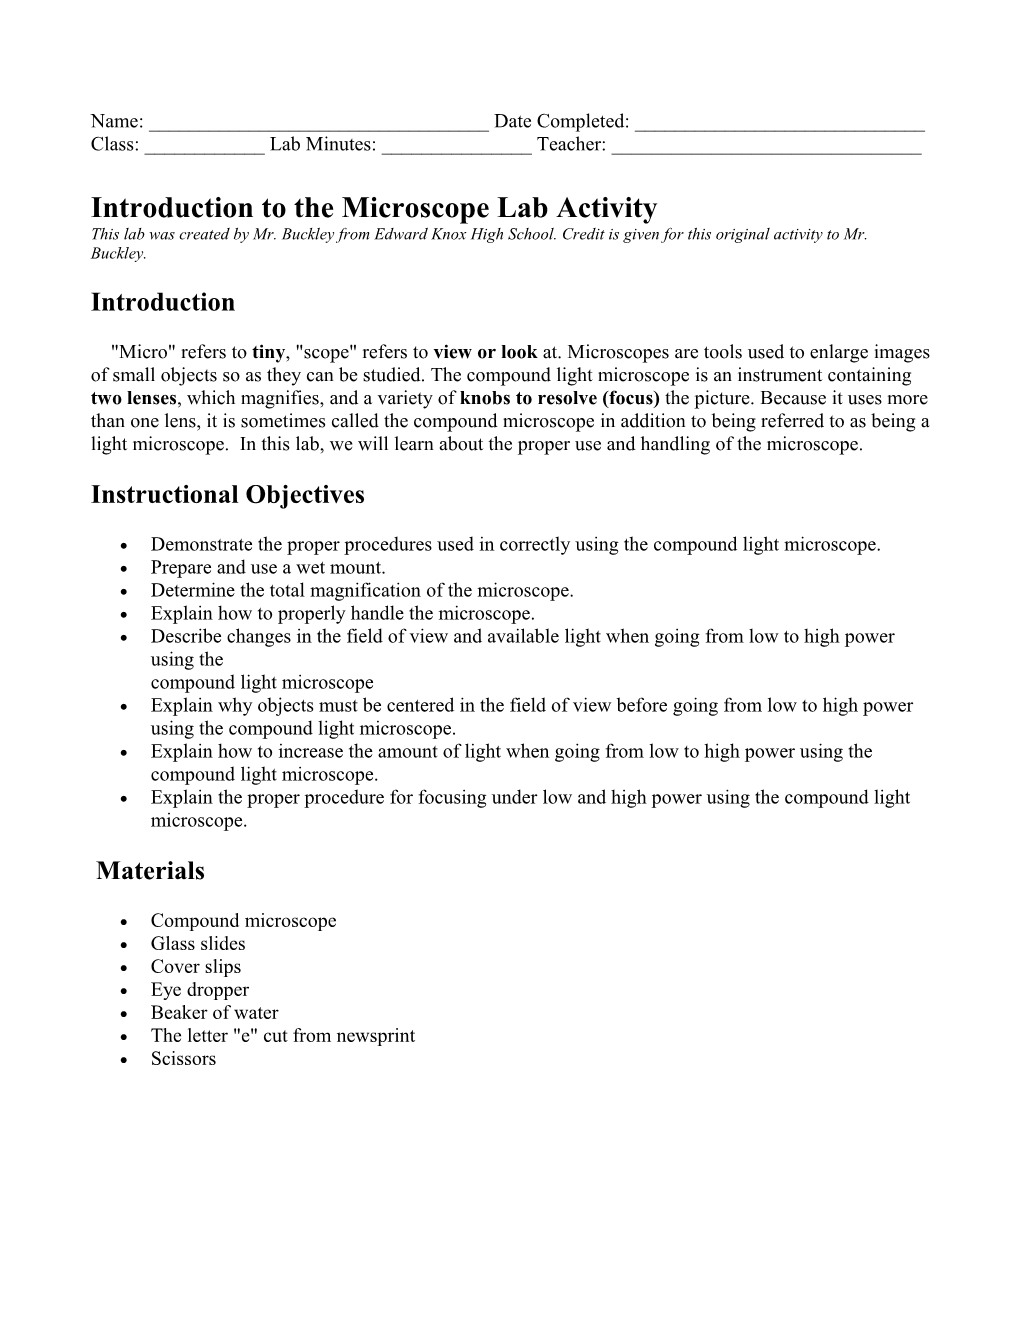 Introduction To The Microscope Lab Activity